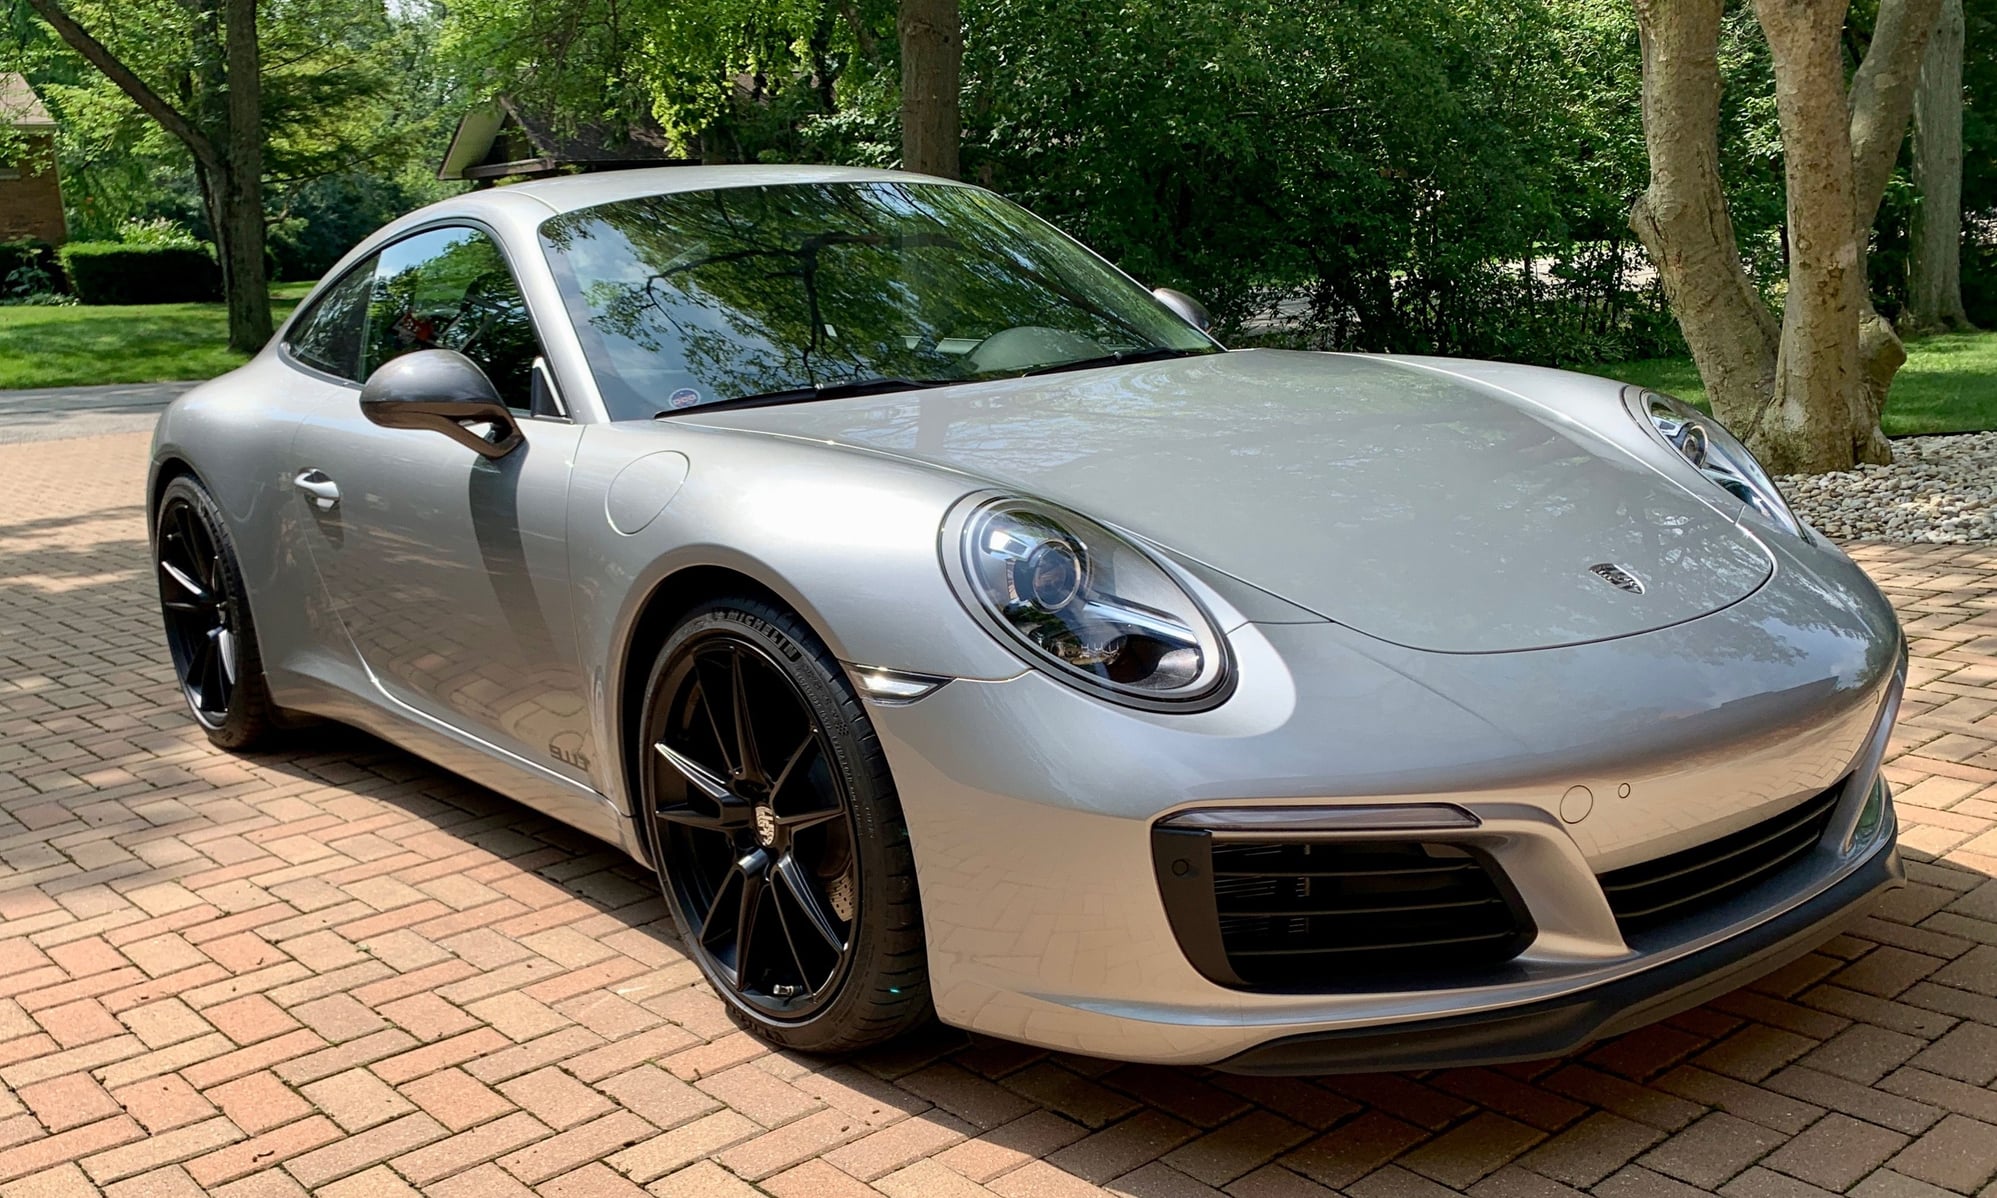 2018 Porsche 911 - 18 Carrera T, manual, driver's build - Used - VIN WP0AA2A92JS106501 - 6,200 Miles - 6 cyl - 2WD - Manual - Coupe - Silver - Northfield, IL 60093, United States